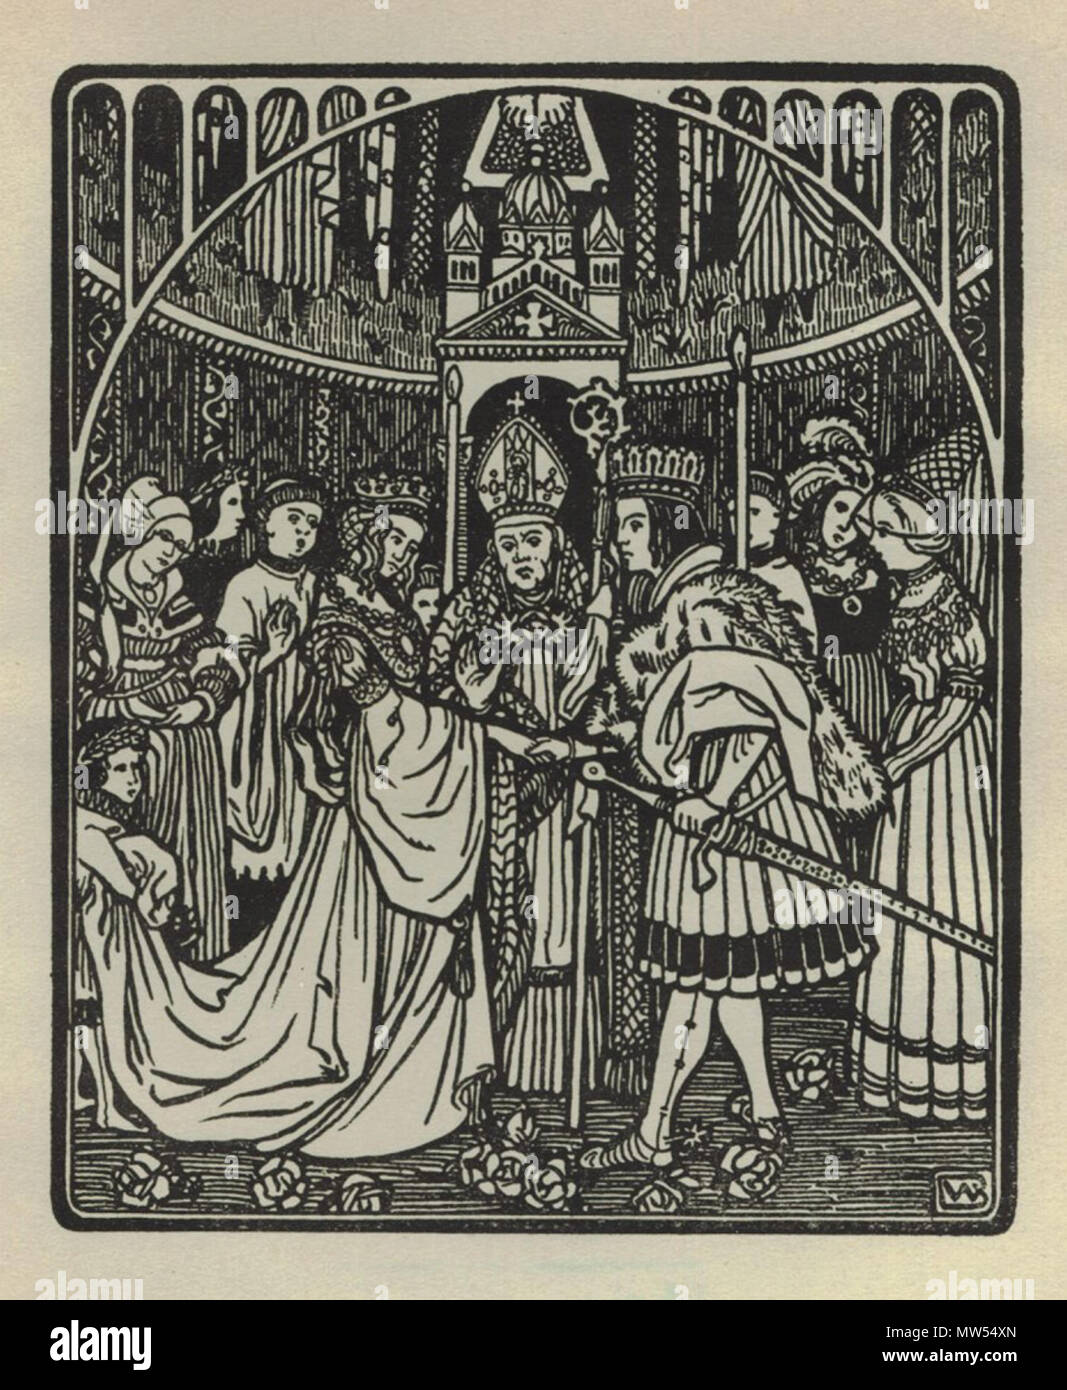 . English: Marriage of a king and queen, with a bishop officiating. Late 19th or early 20th century. Bernhard Wenig 85 Bishop, king and queen Stock Photo